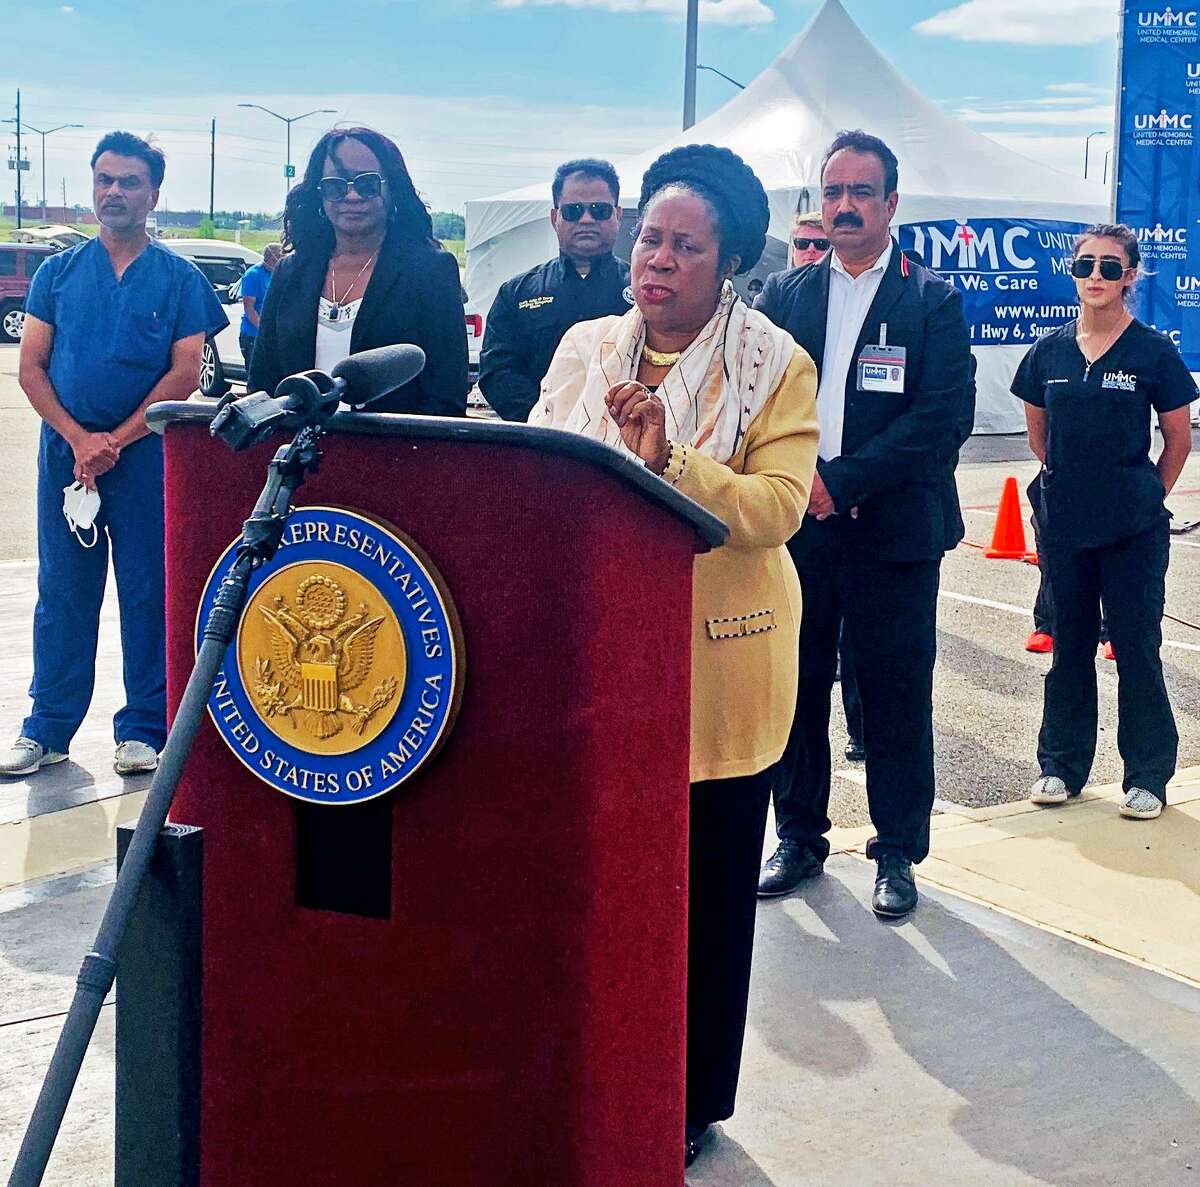 Congresswoman Shelia Jackson Lee speaks at a press conference to announce the opening of a free COVID-19 testing site at Sugar Land's Smart Financial Centre on Tuesday, March 31.